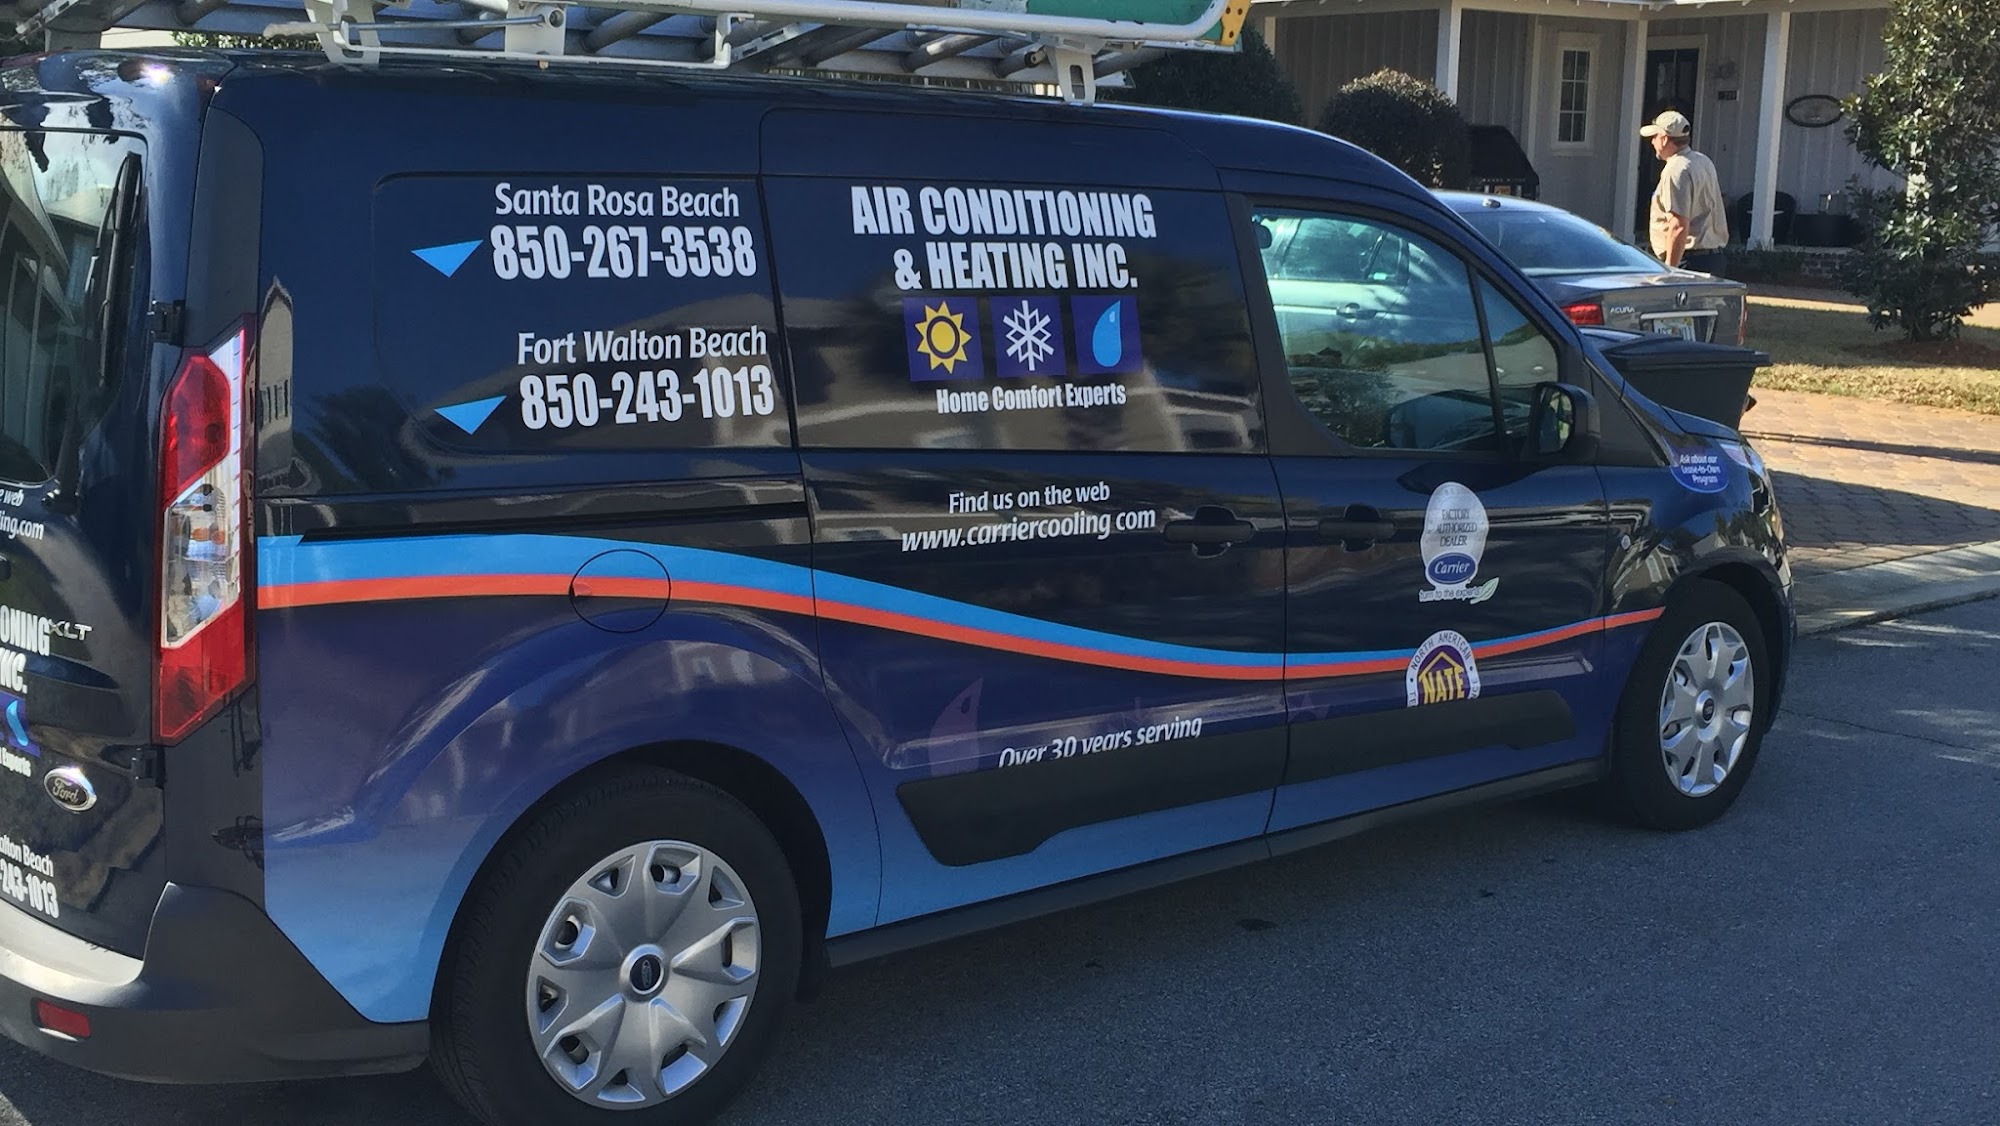 Air Conditioning & Heating, Inc.